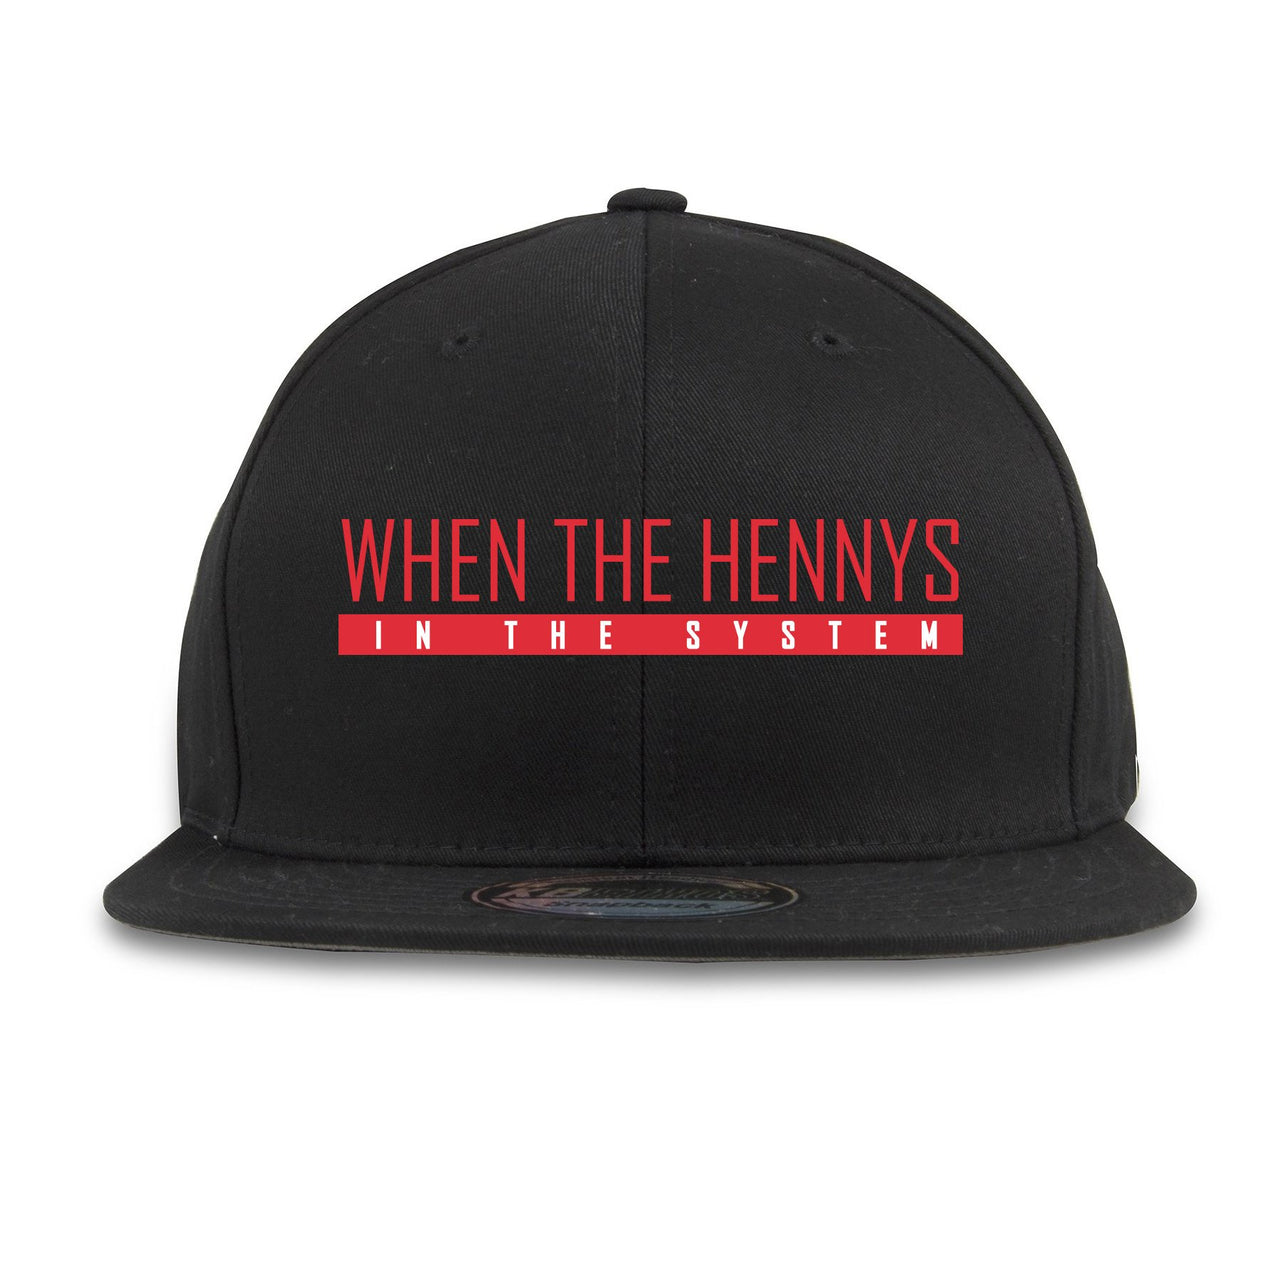 Bred 2019 4s Snapback | When the Hennys, Black